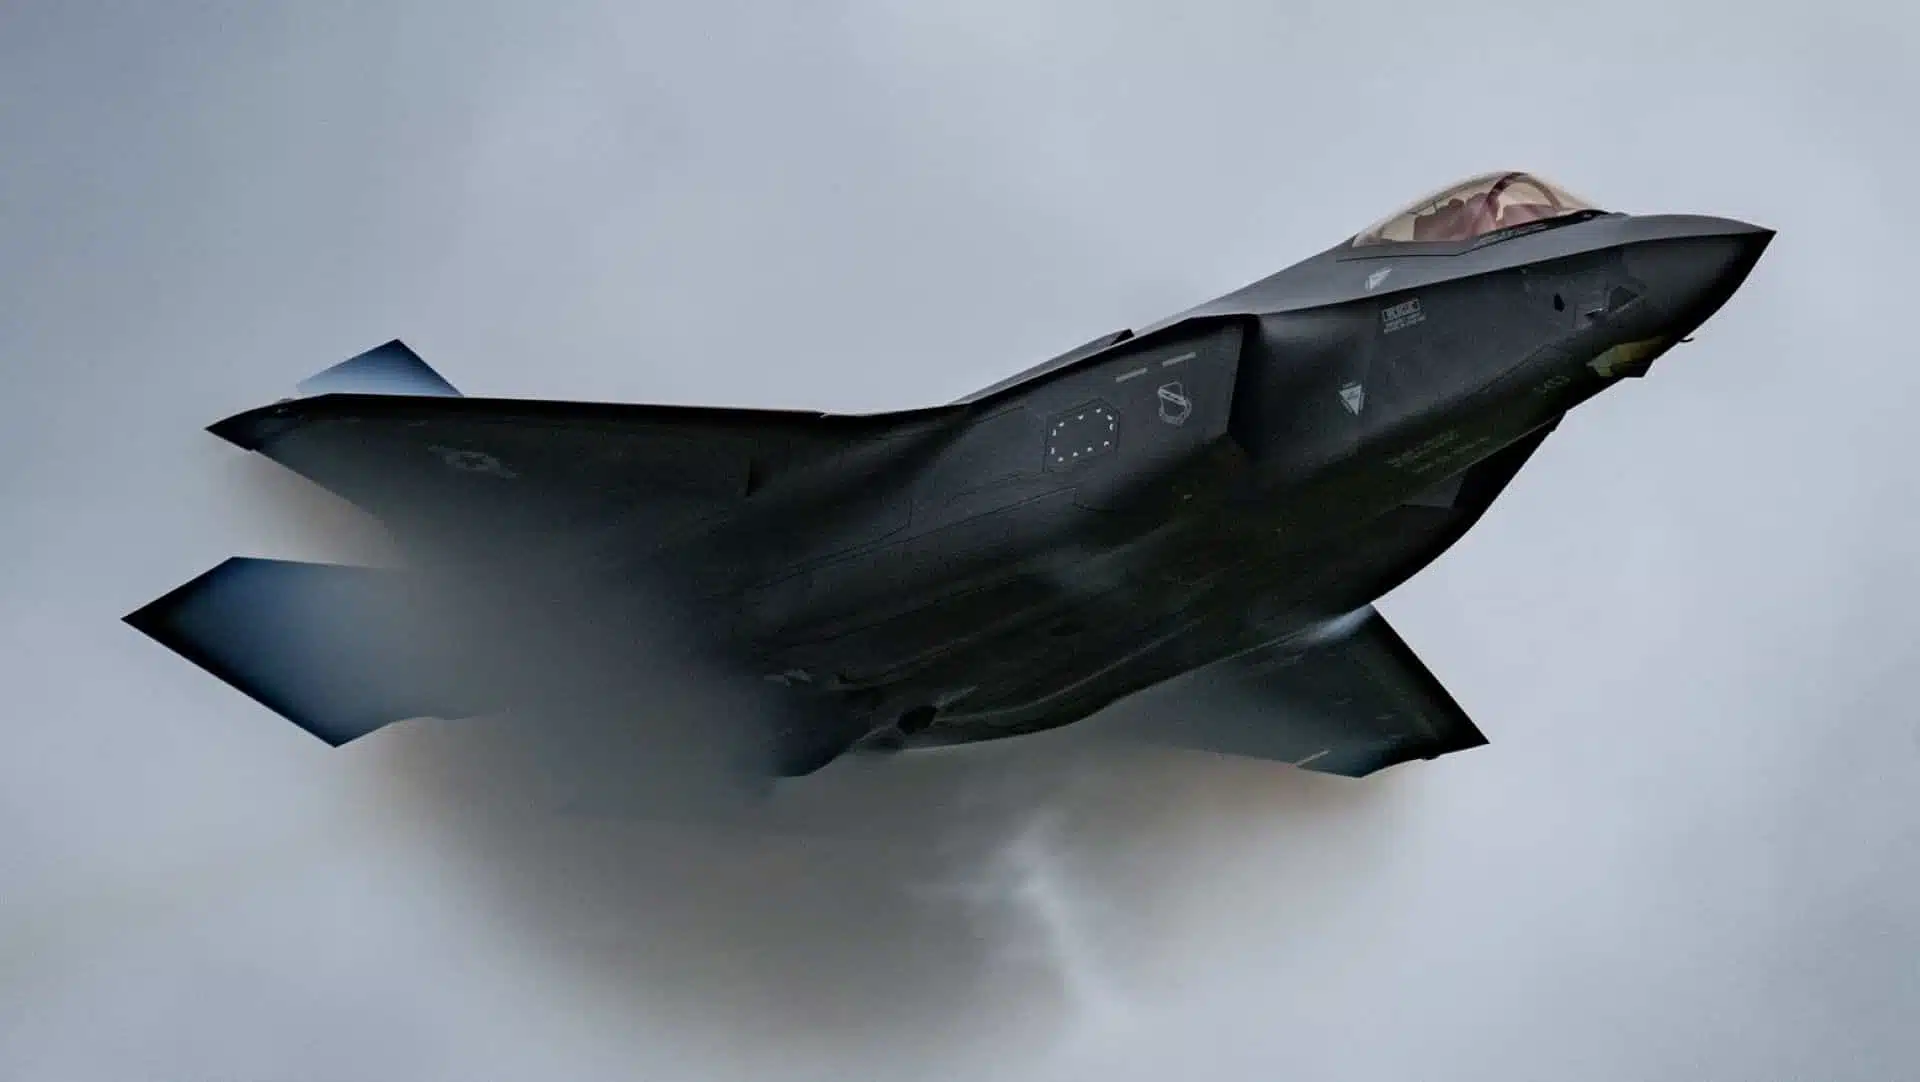 Czechs Want F-35 Fighter Jets, CV-90 Fighting Vehicles